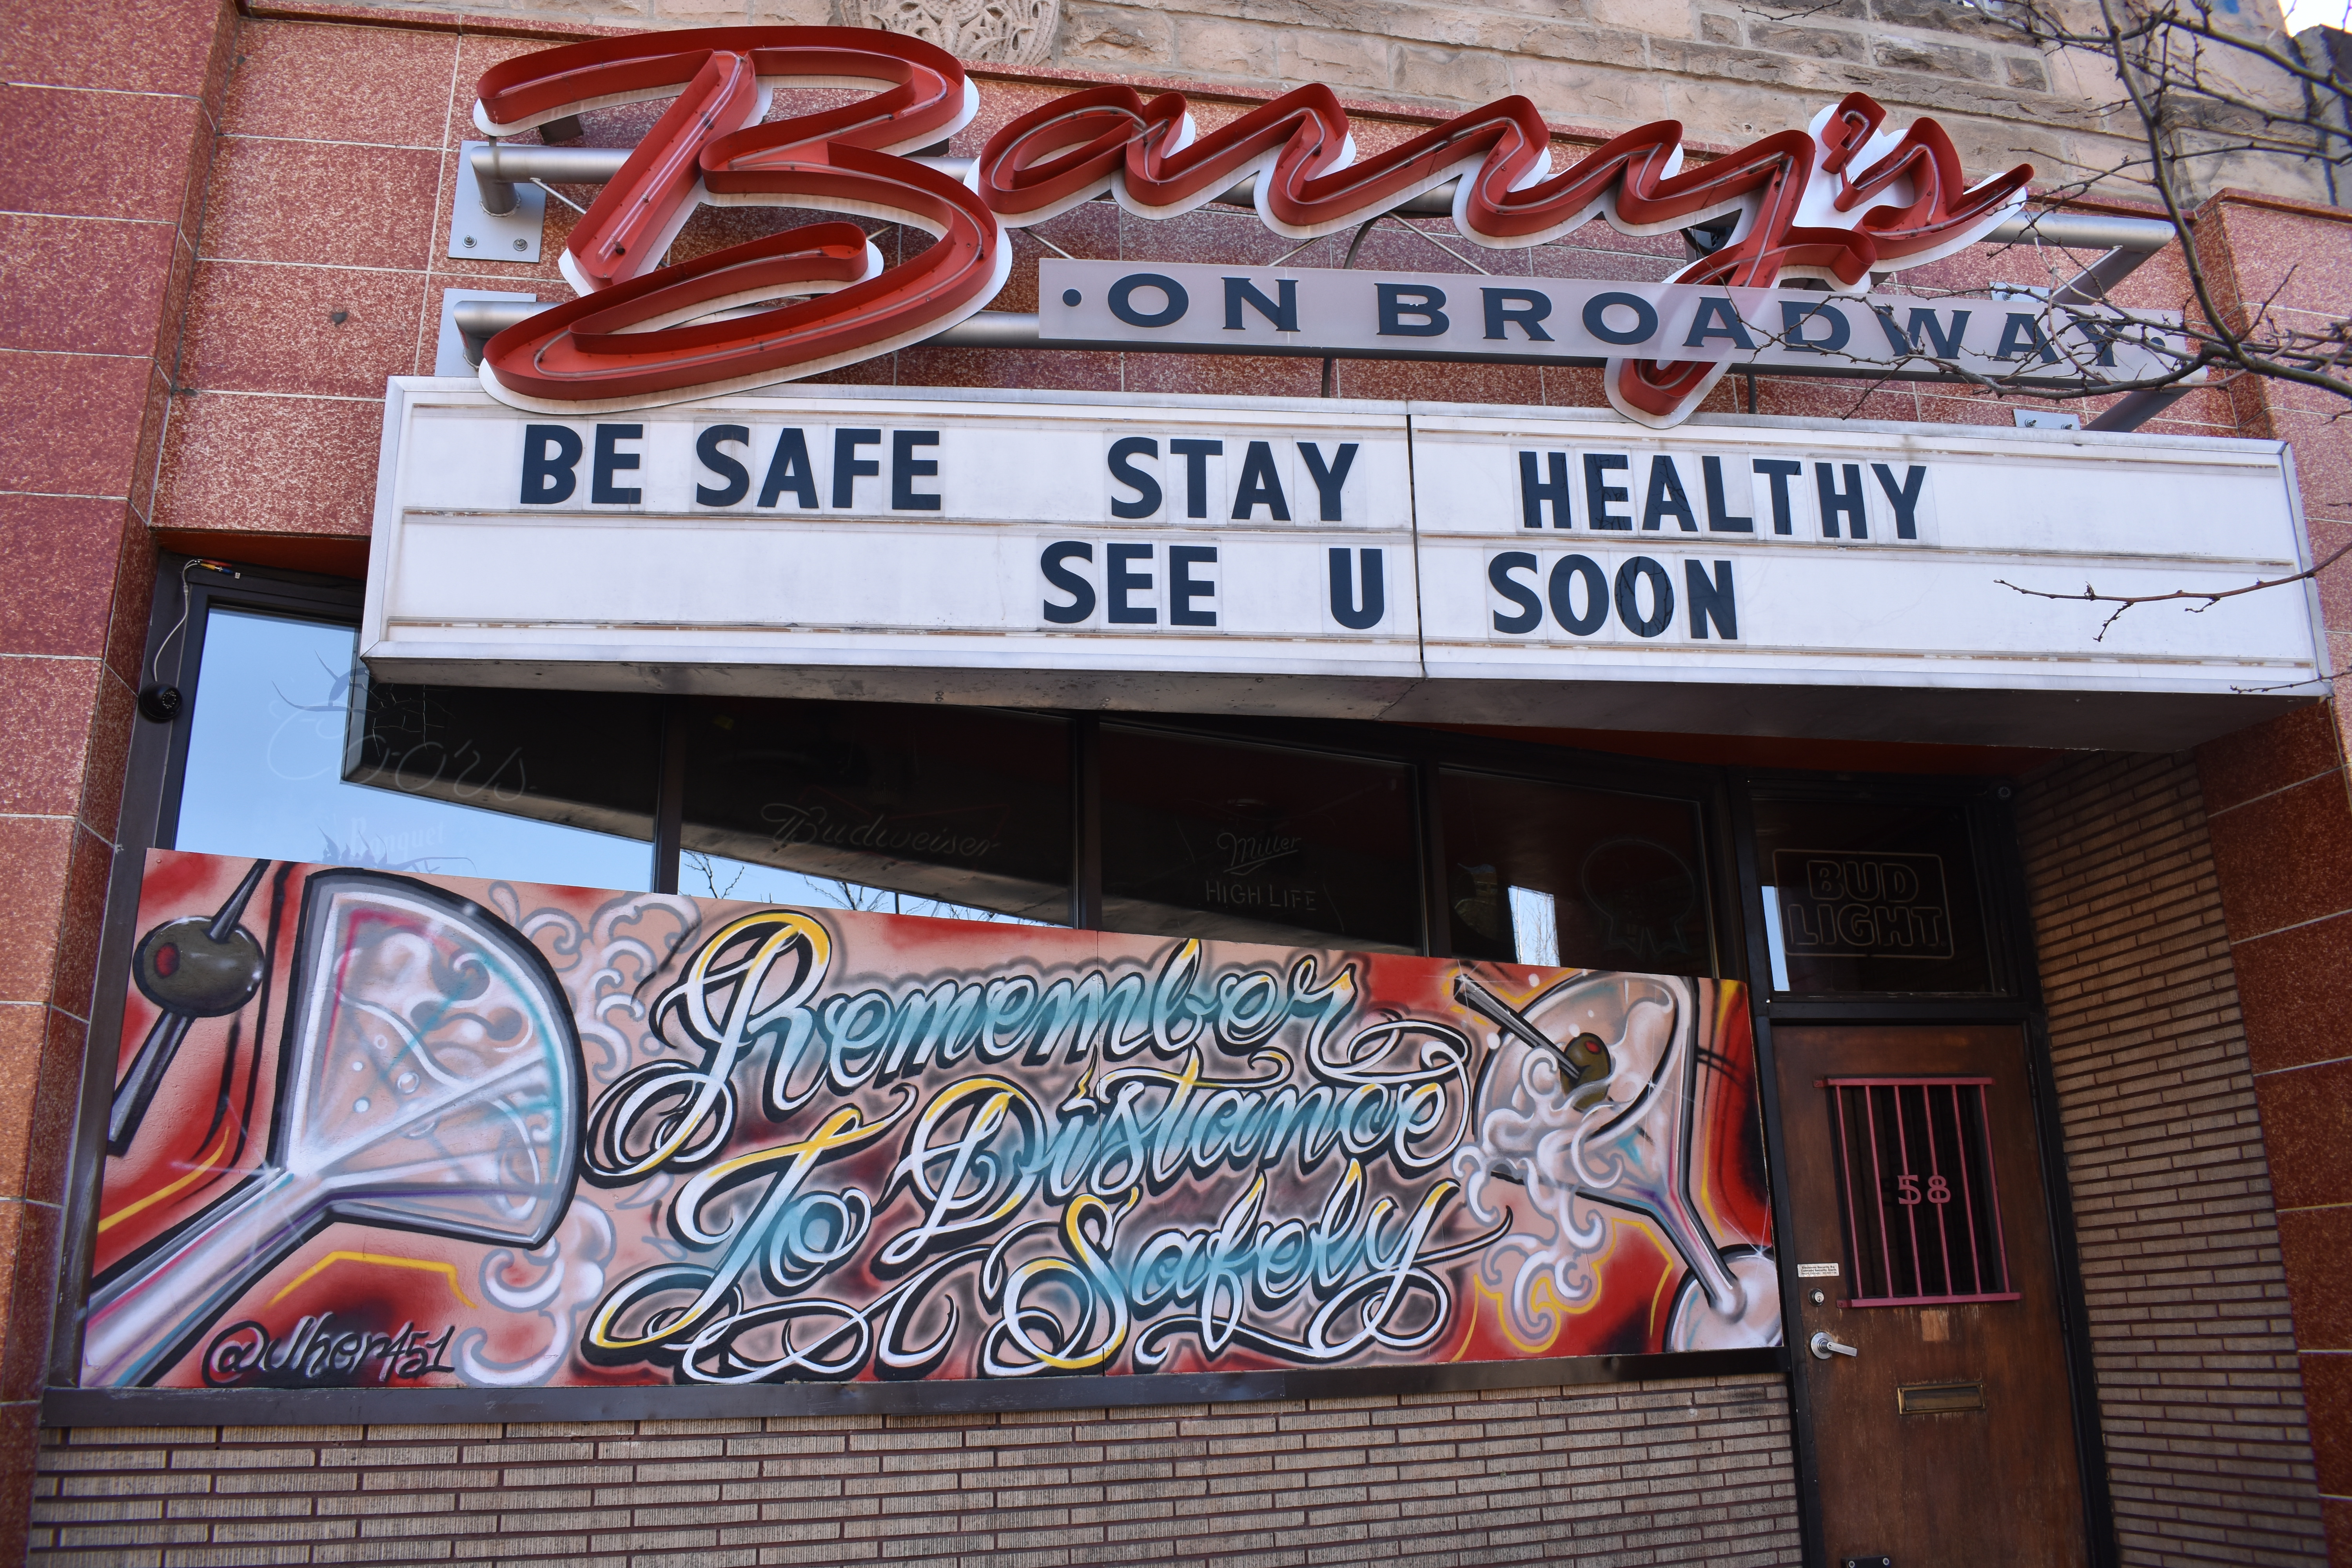 A photo of a closed bar along Broadway in Denver, taken in April of 2020. The marquee sign above the door at Barry's on Broadway says "Be Safe - Stay Healthy - See U Soon." The owners have boarded up their windows during the stay at home order, which artists have decorated with images of martinis and the words, "Remember to Distance Safely."